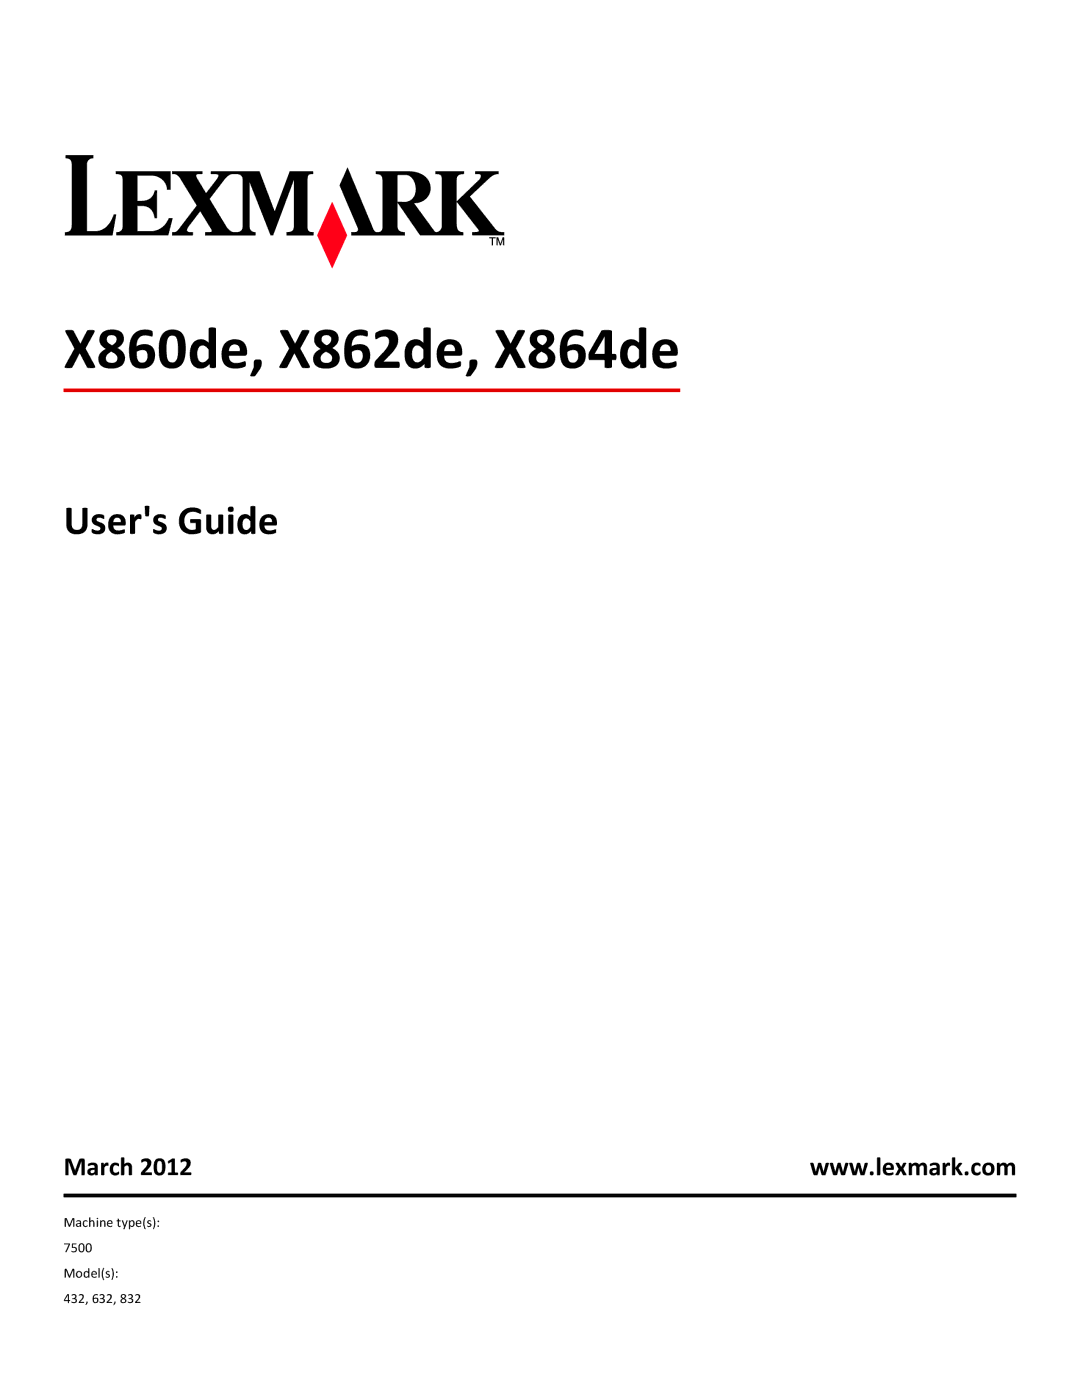 Lexmark 19Z0100, X862DTE, 19Z0201 manual Users Guide, March 